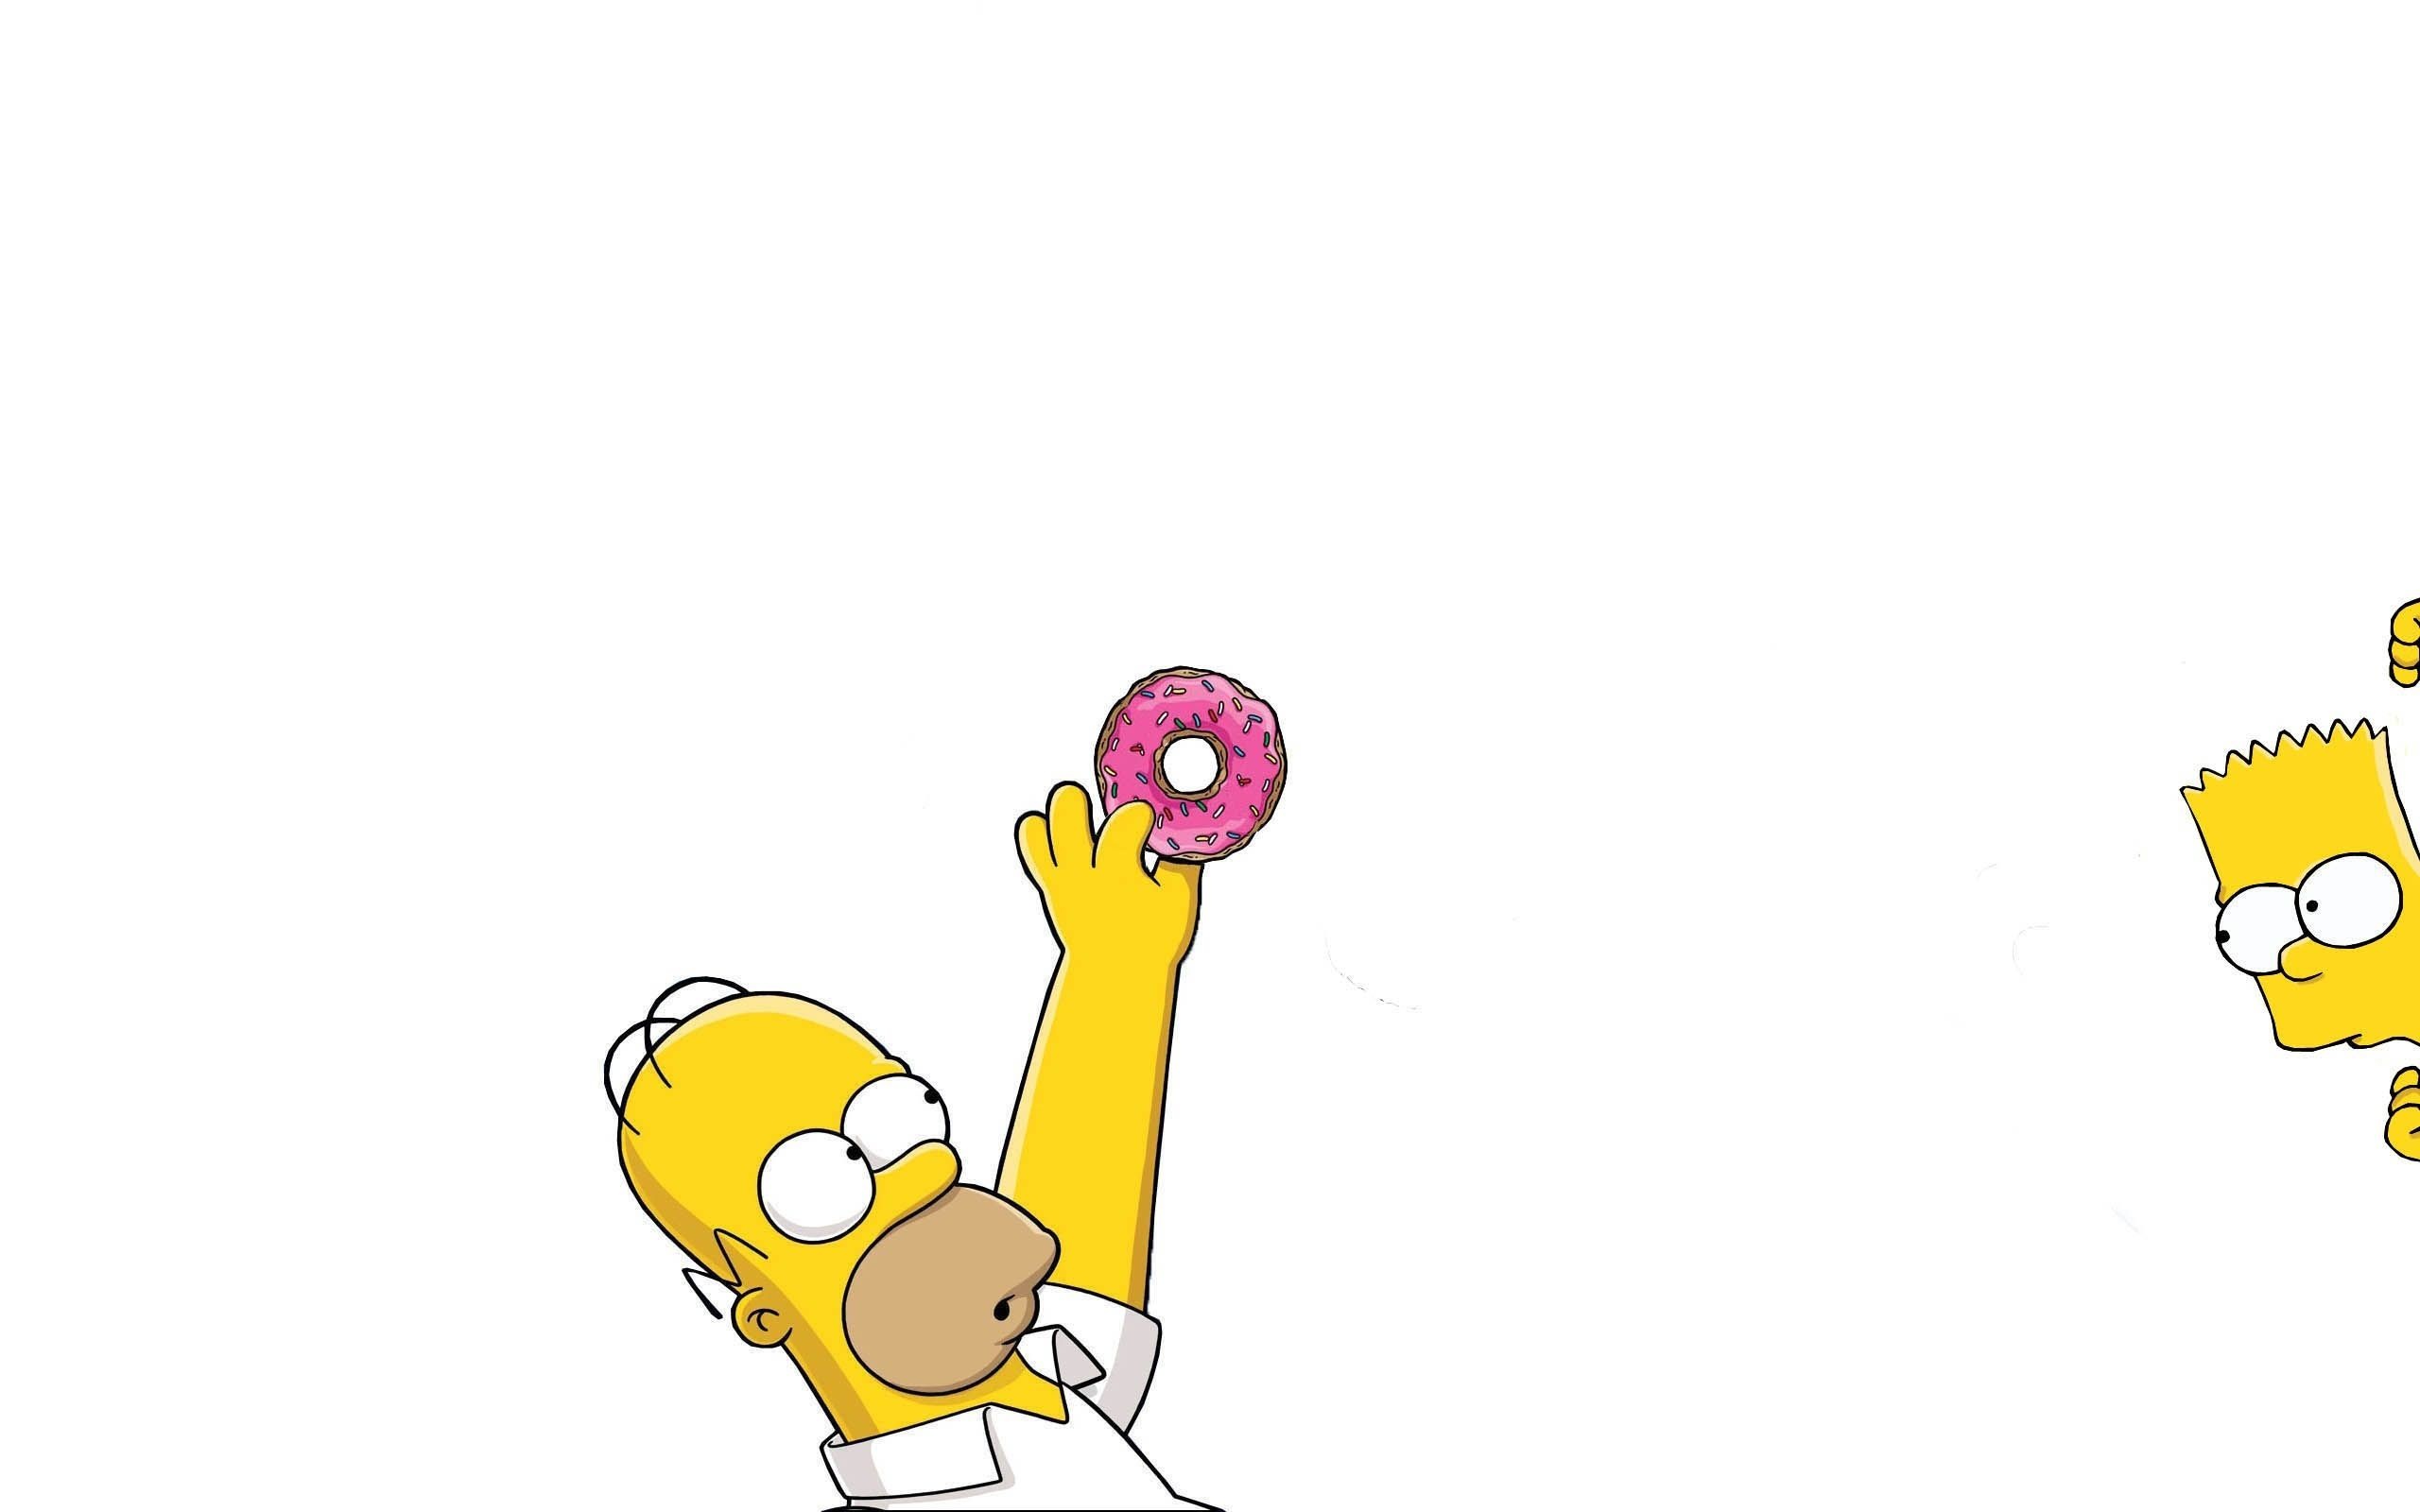 The Simpsons, Computer wallpapers, Iconic animation, Classic characters, 2560x1600 HD Desktop